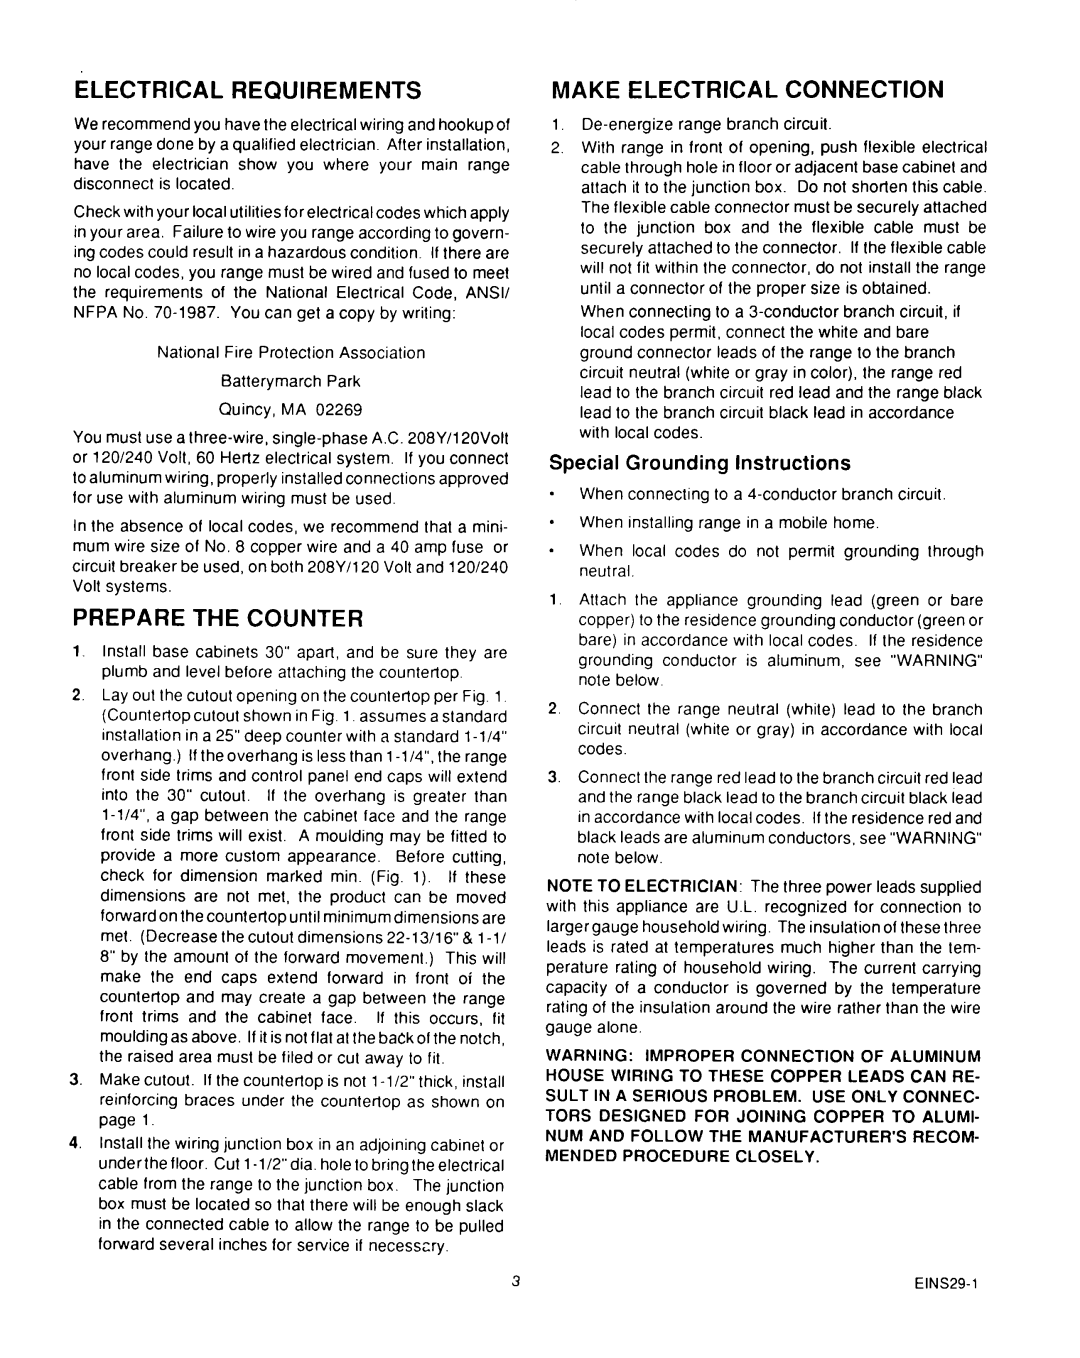 Roper D975 Electrical Requirements, Prepare The Counter, Make Electrical Connection, Special Grounding Instructions 